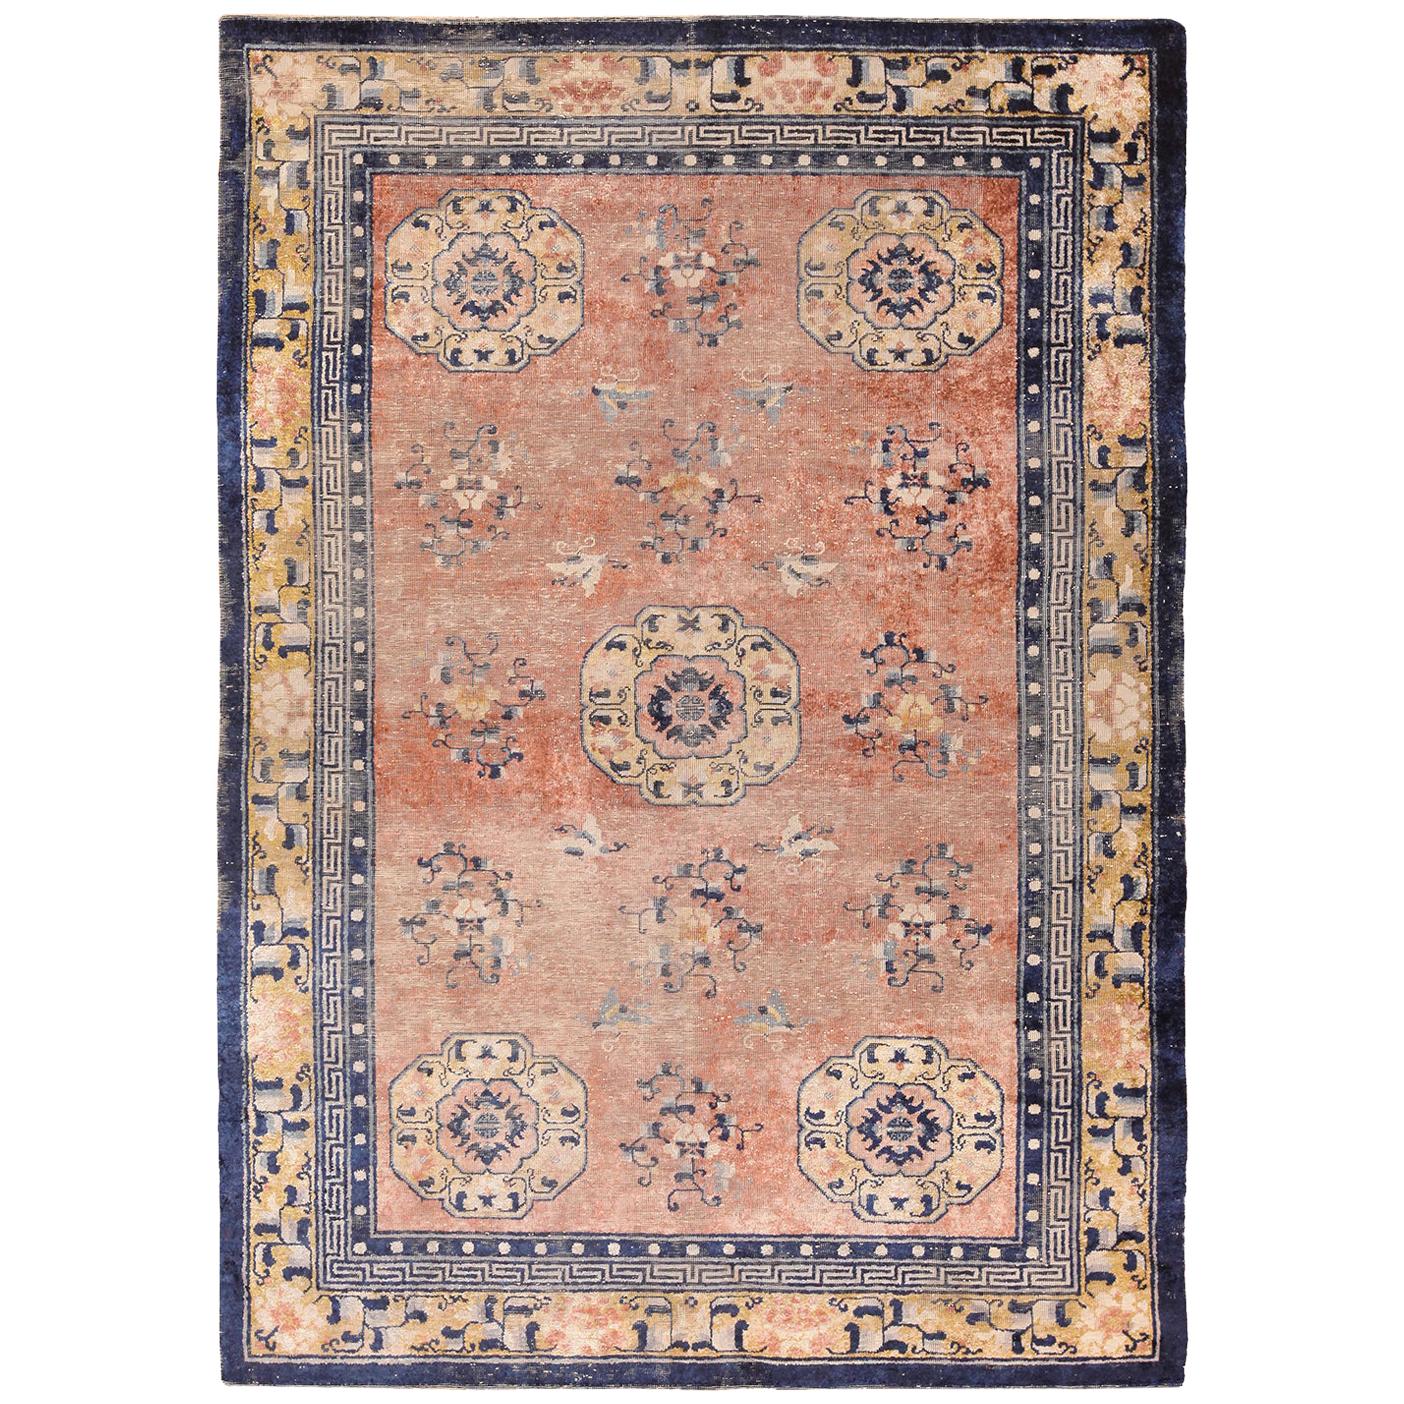 Antique Shabby Chic Silk Chinese Rug. Size: 6 ft 1 in x 9 ft 8 in